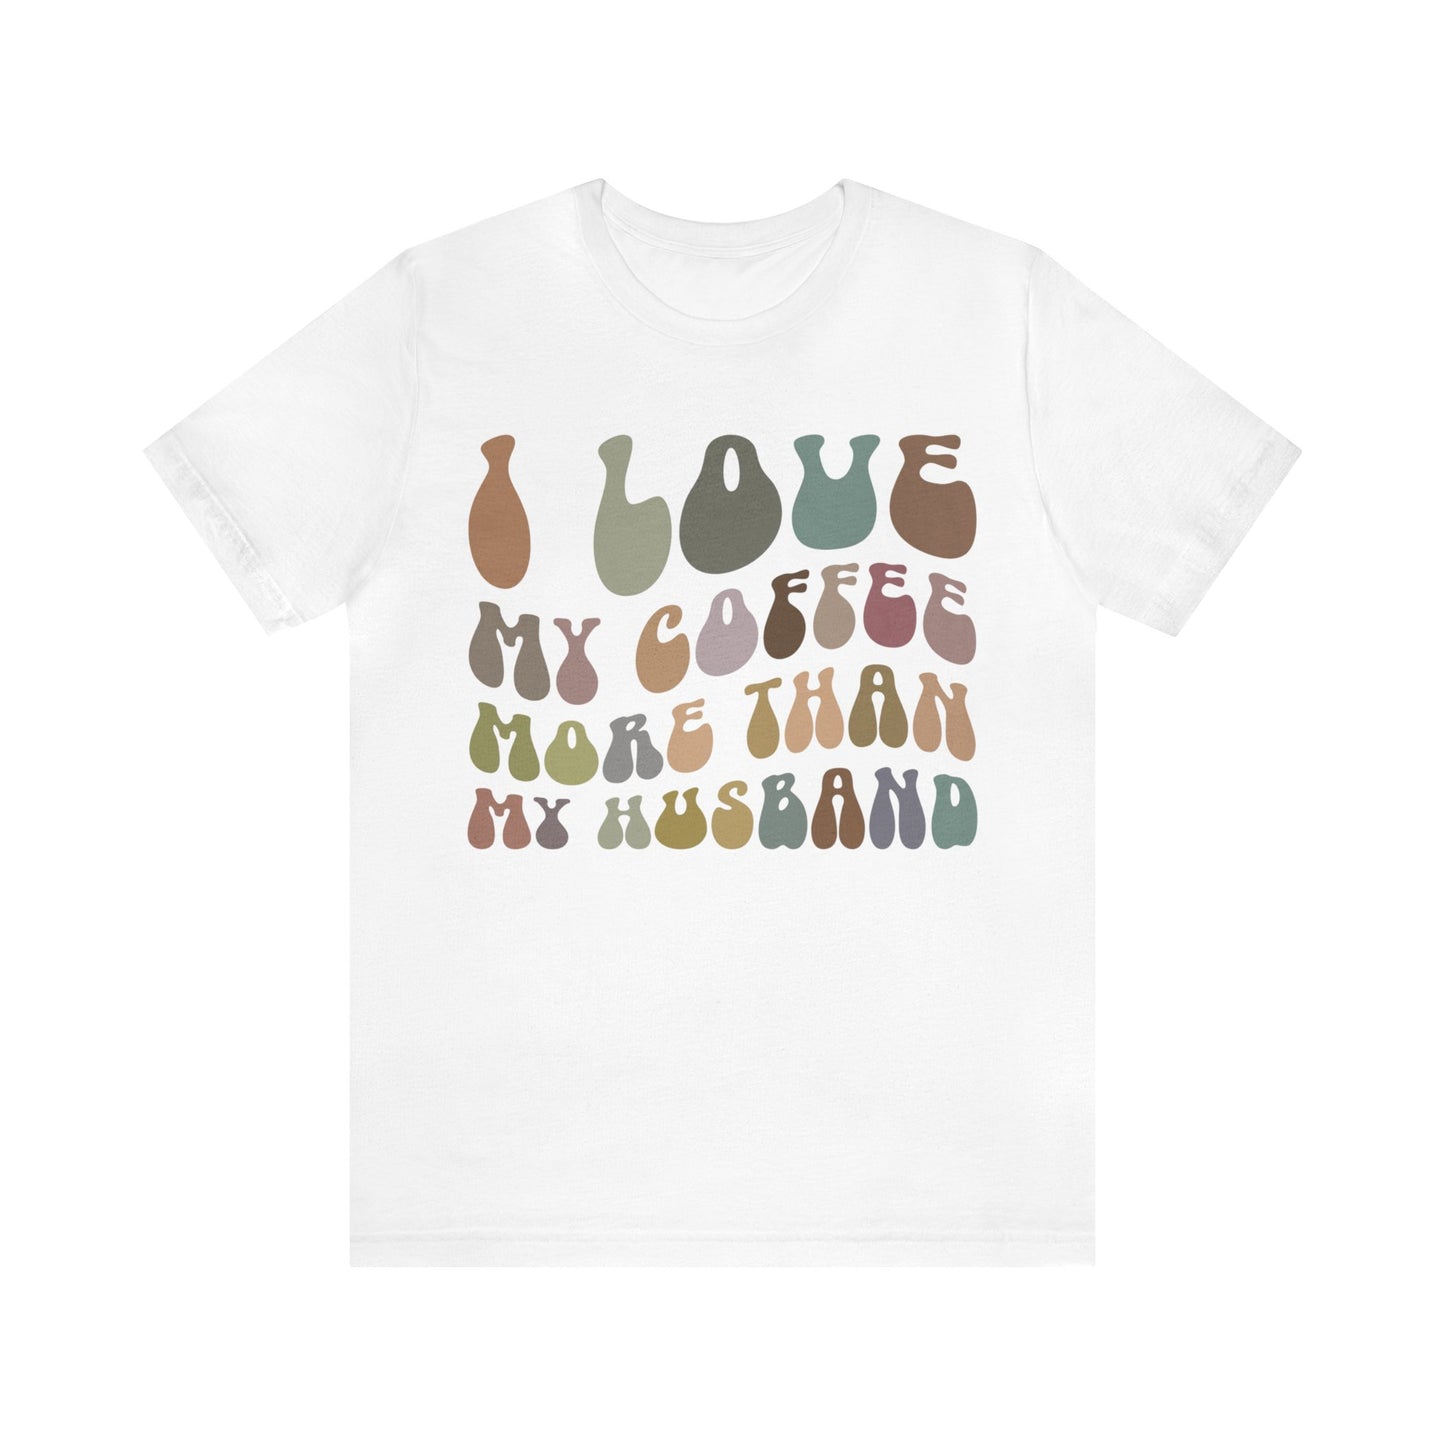 I Love My Coffee More Than My Husband Shirt, Funny Coffee Shirt, Husband Gift, Gift For Husband, Gift for lover Coffee, T1437